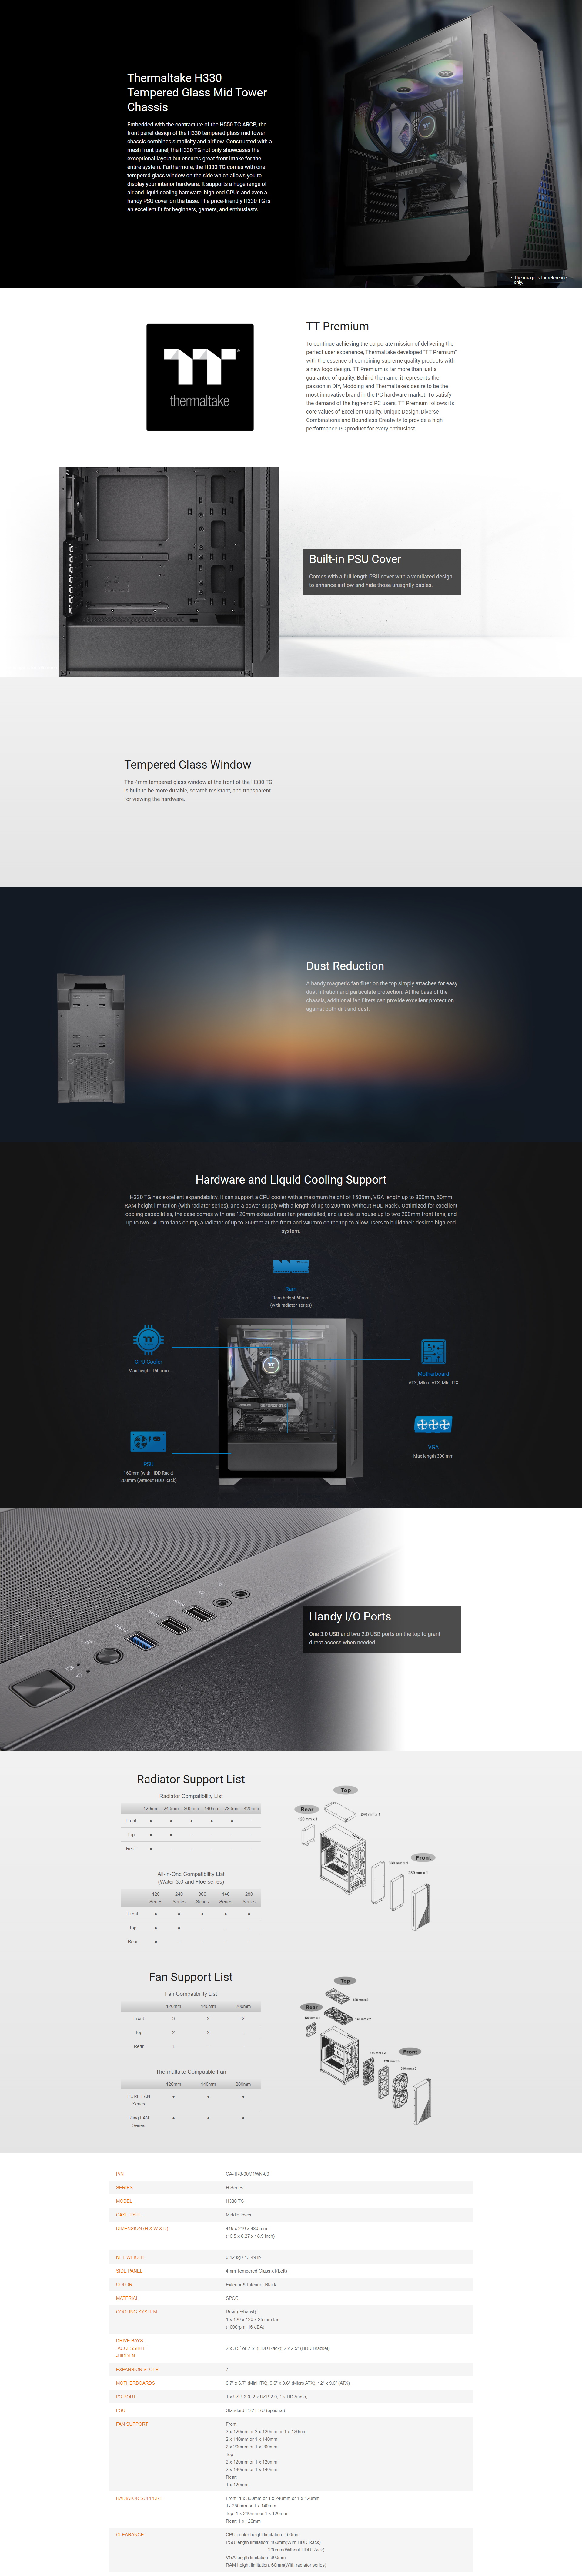 A large marketing image providing additional information about the product Thermaltake H330 - Mid Tower Case - Additional alt info not provided